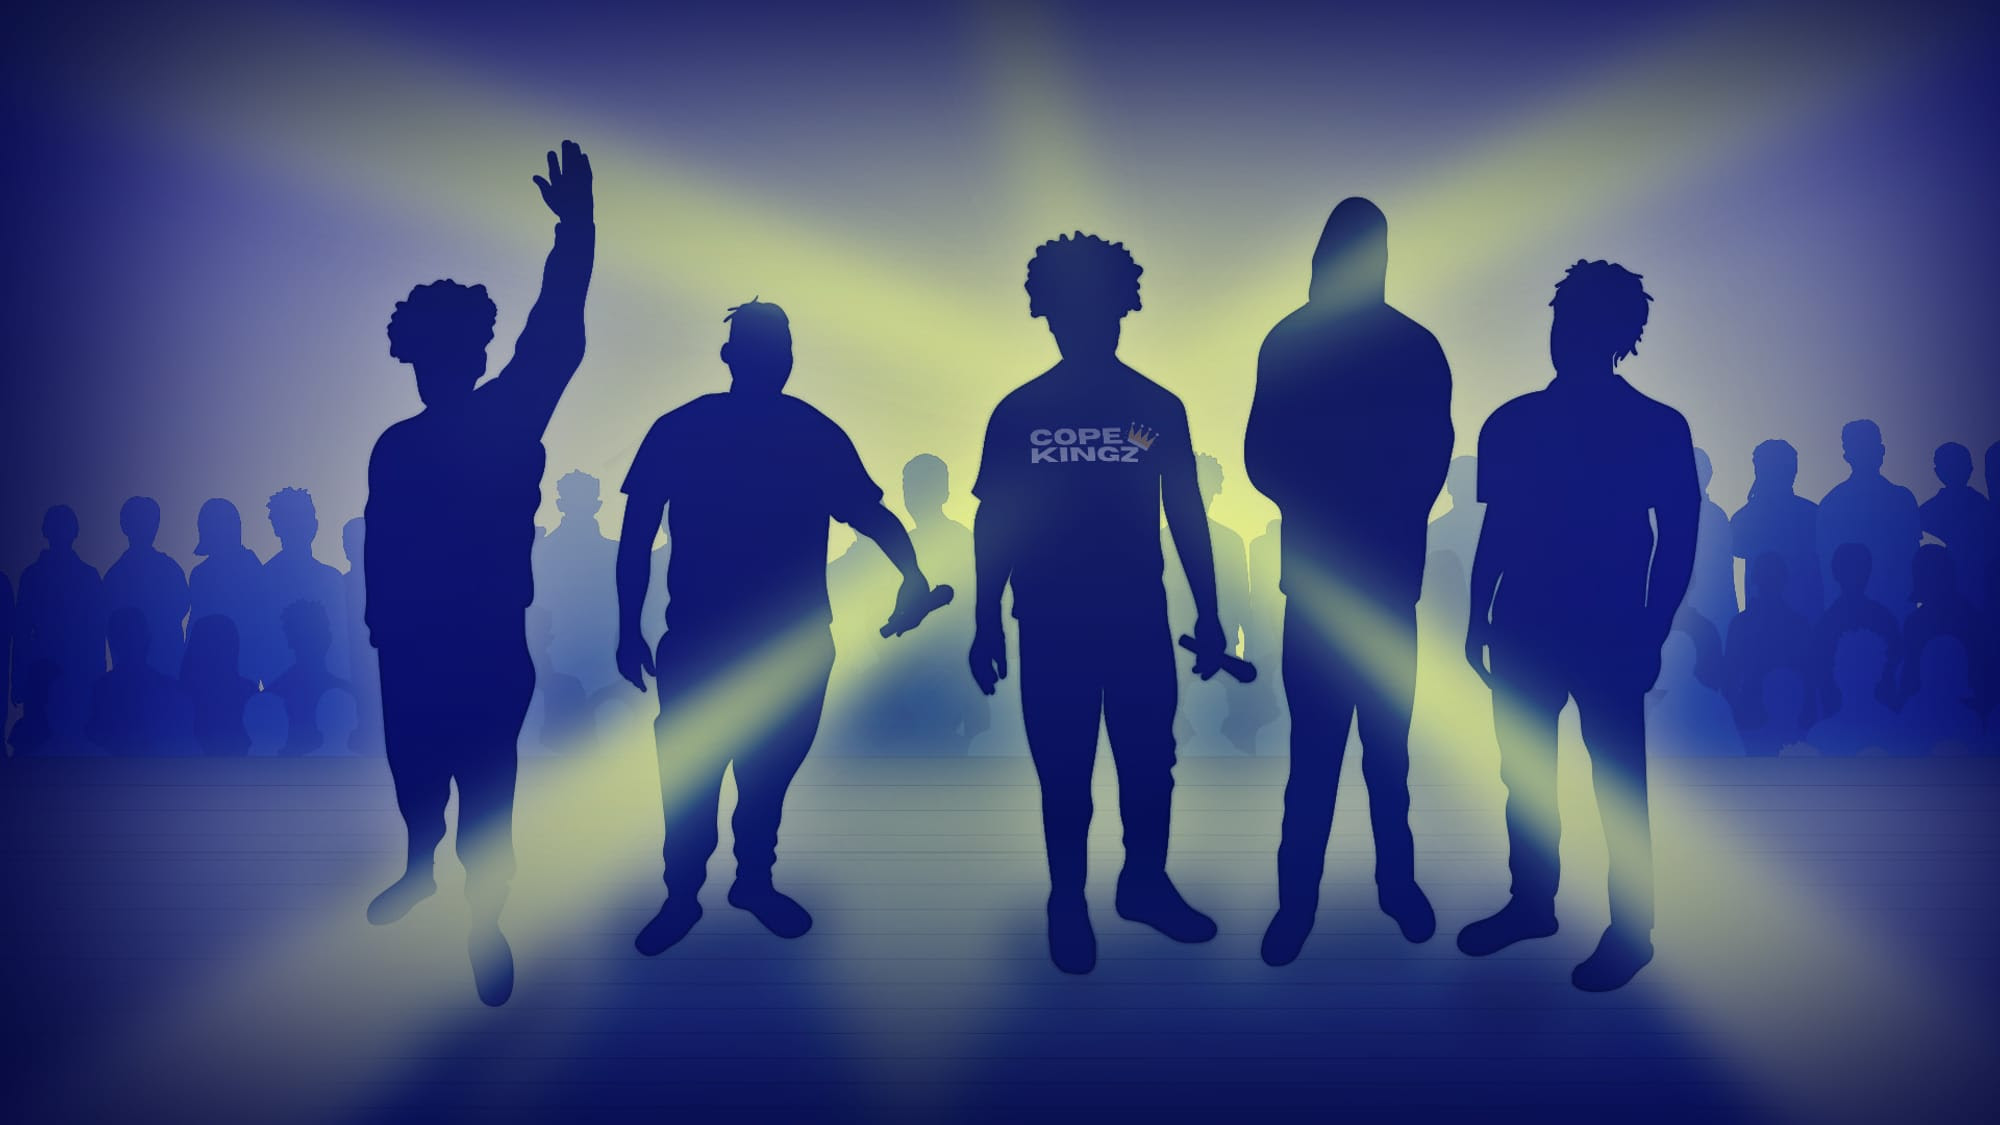 An illustration of five backlit people standing in front of the crowd. The performer second from the left and middle holds a microphone and the member in the middle wears a T-shirt with the name “Cope Kingz” on it.